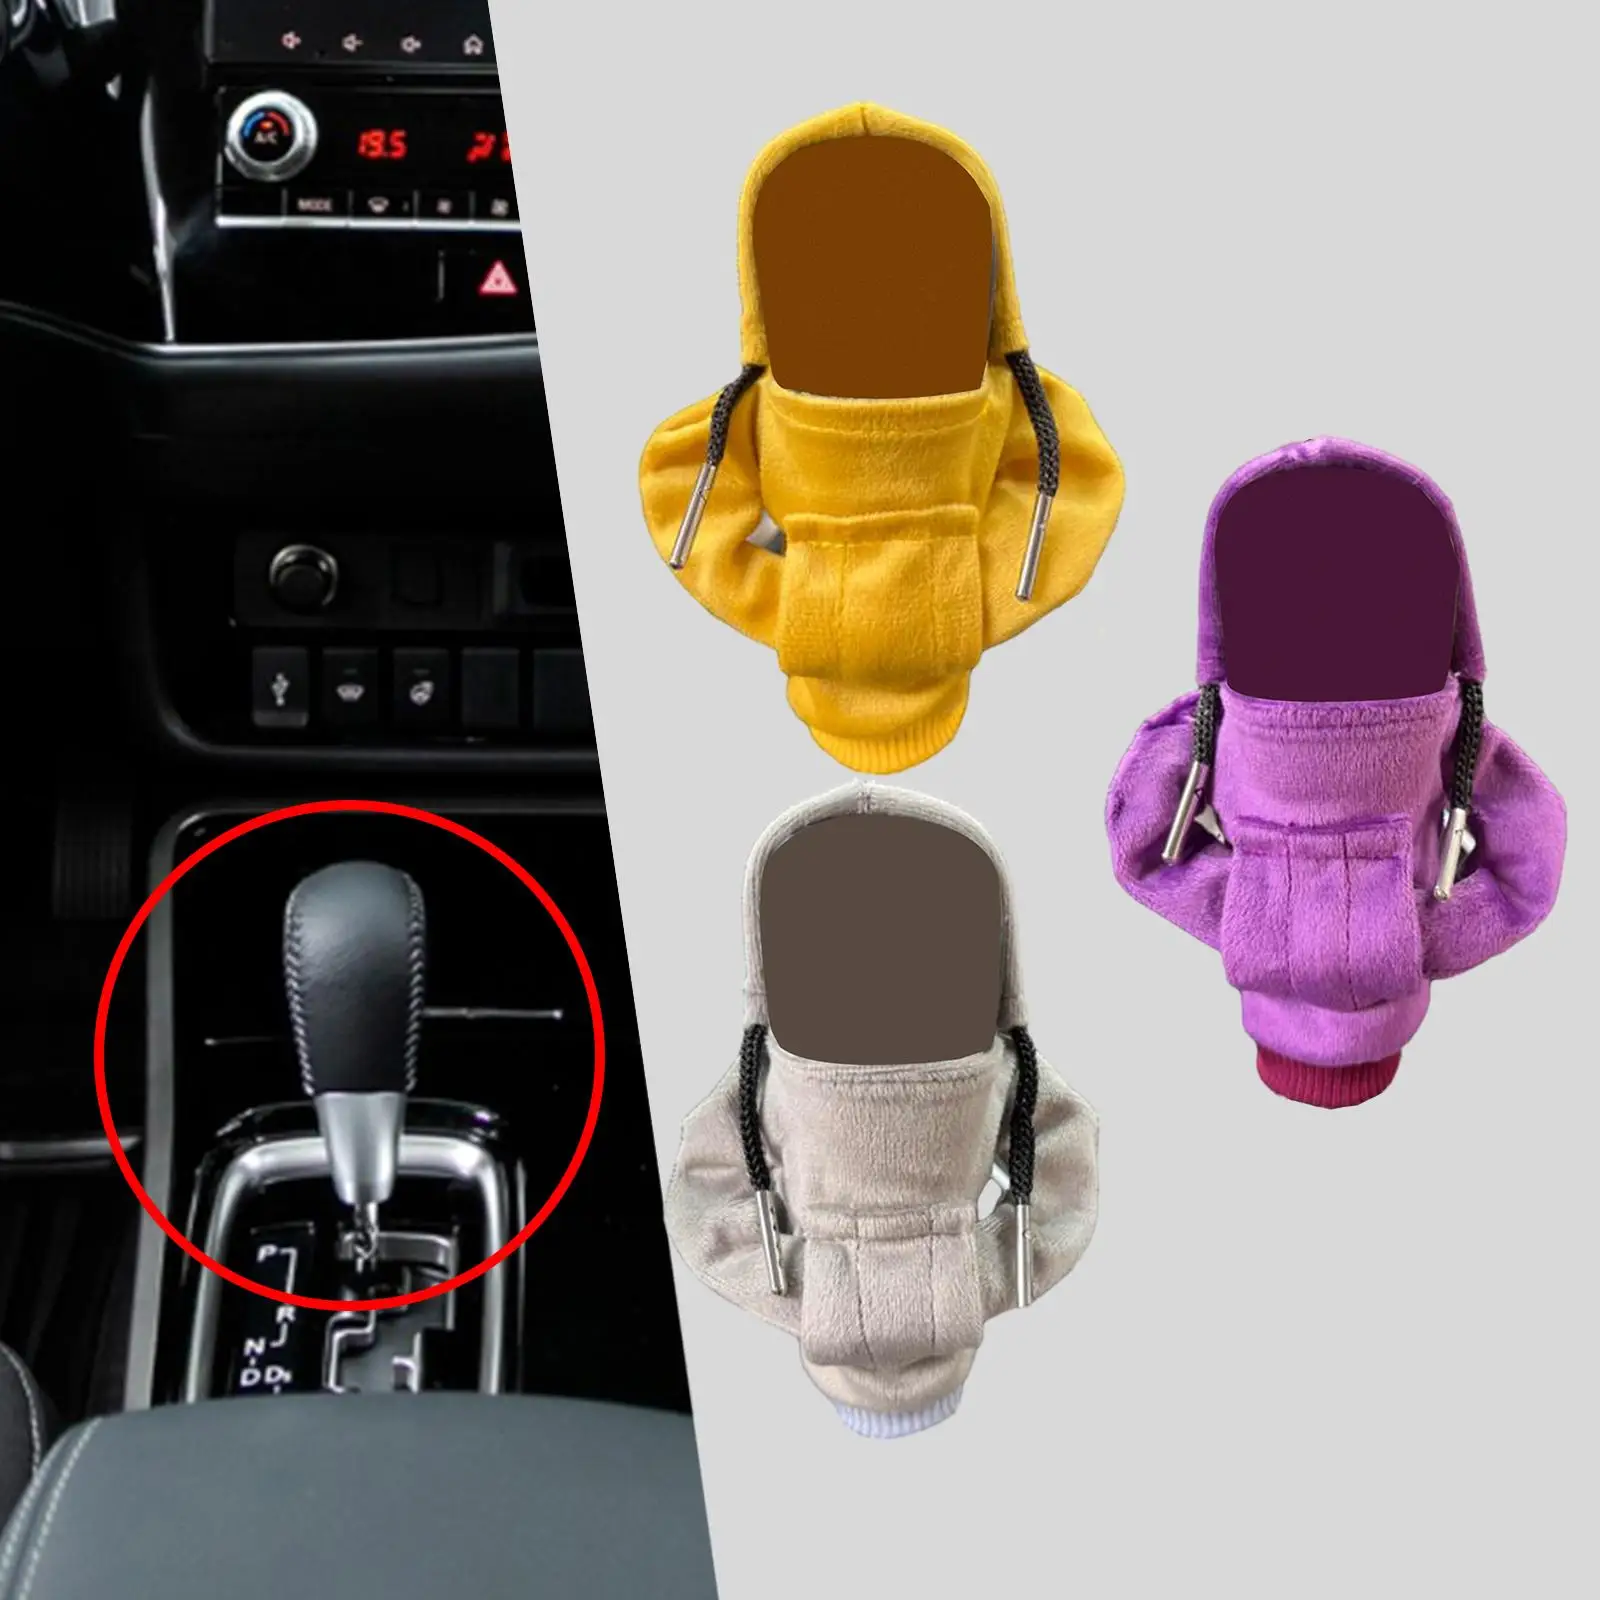 Auto Gear Shifter Knob Cover Sweatshirt Comfortable Durable Fashion Hoodies Soft Gear Shifter Hoodie Cover for Car Women or Man